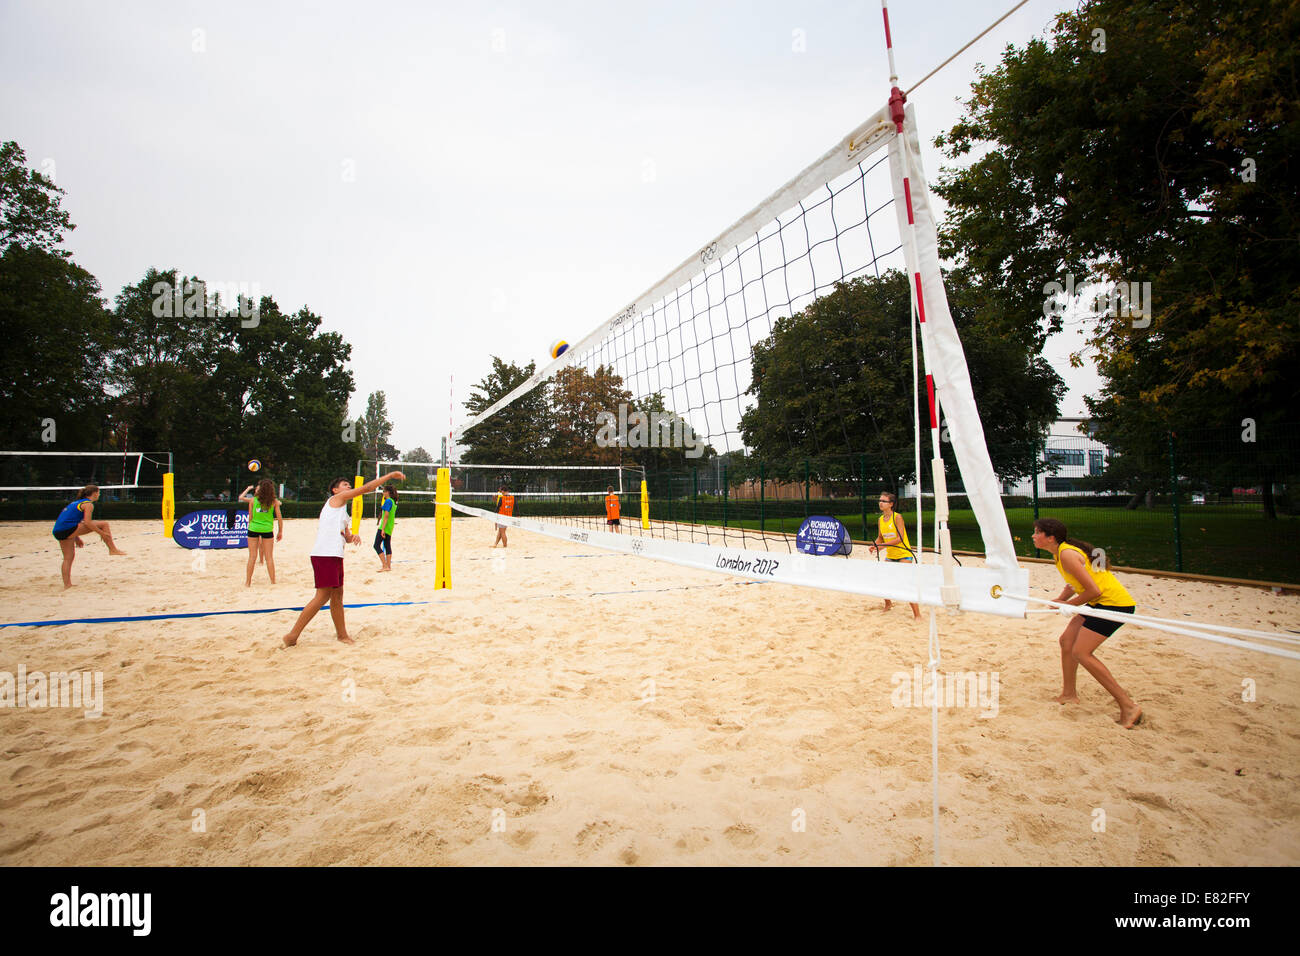 Young people playing on beach volleyball court in a park Stock Photo - Alamy